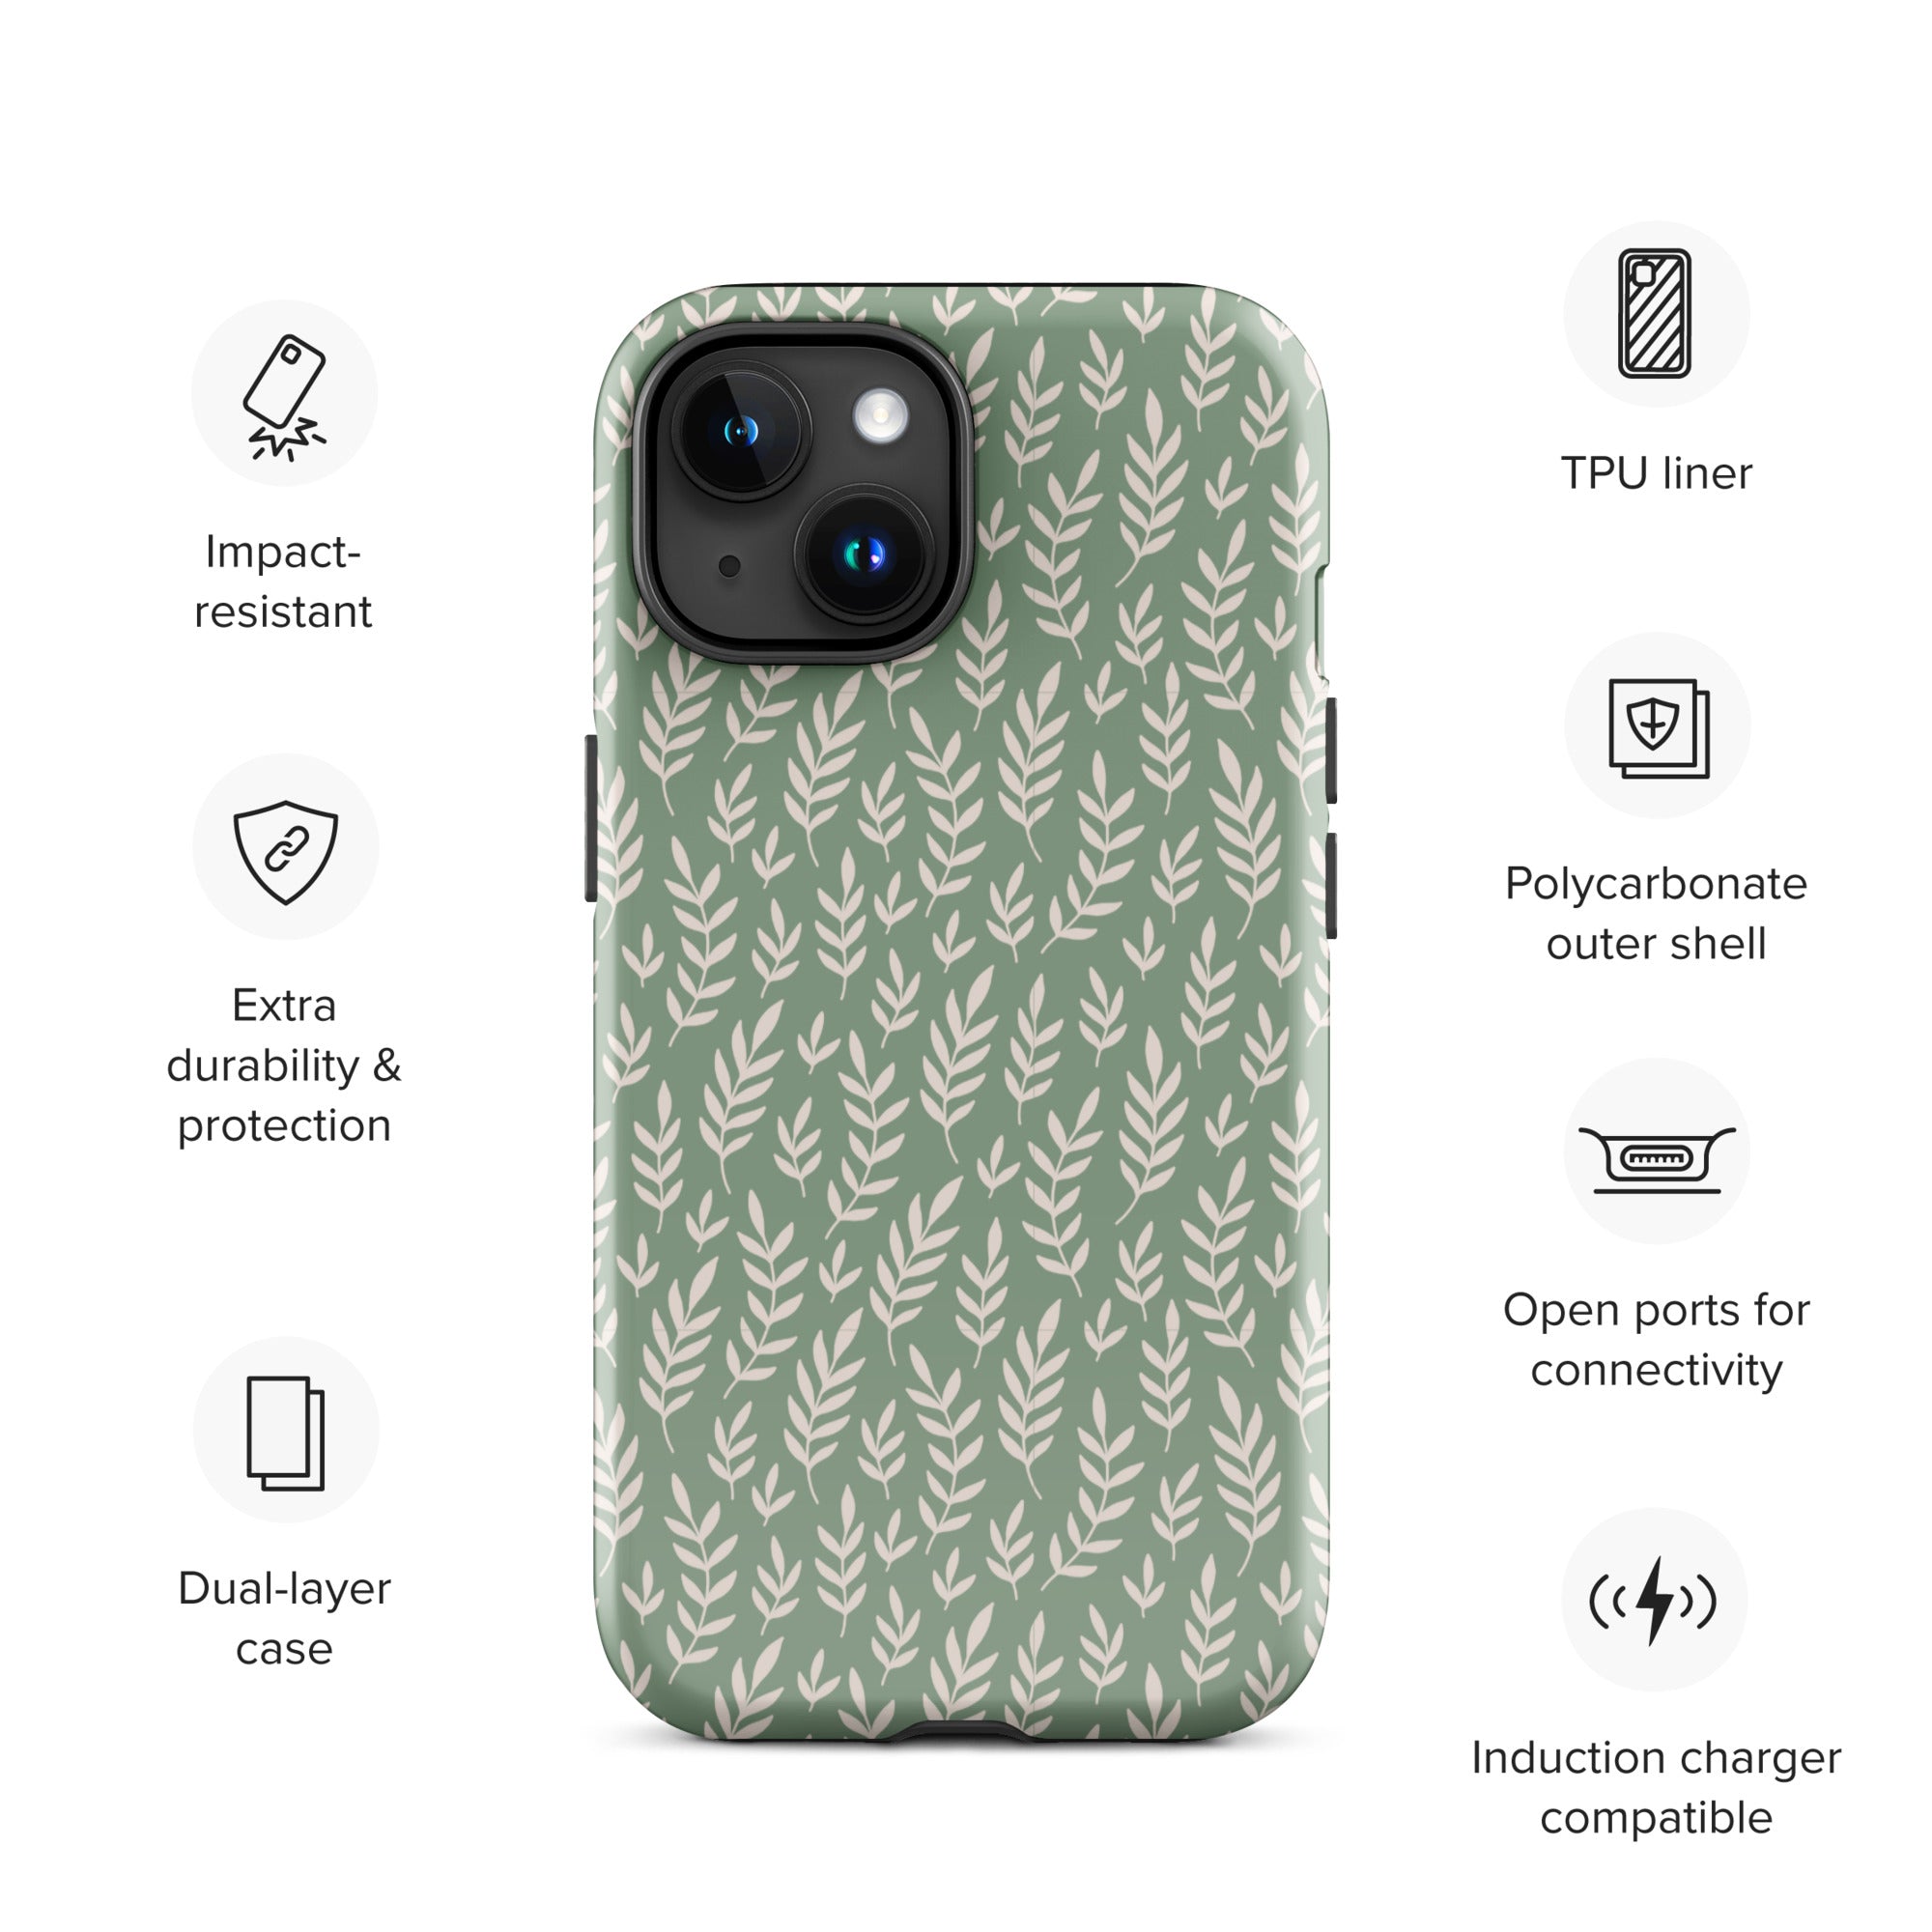 Unbe-LEAF-able - Tough Case for iPhone®